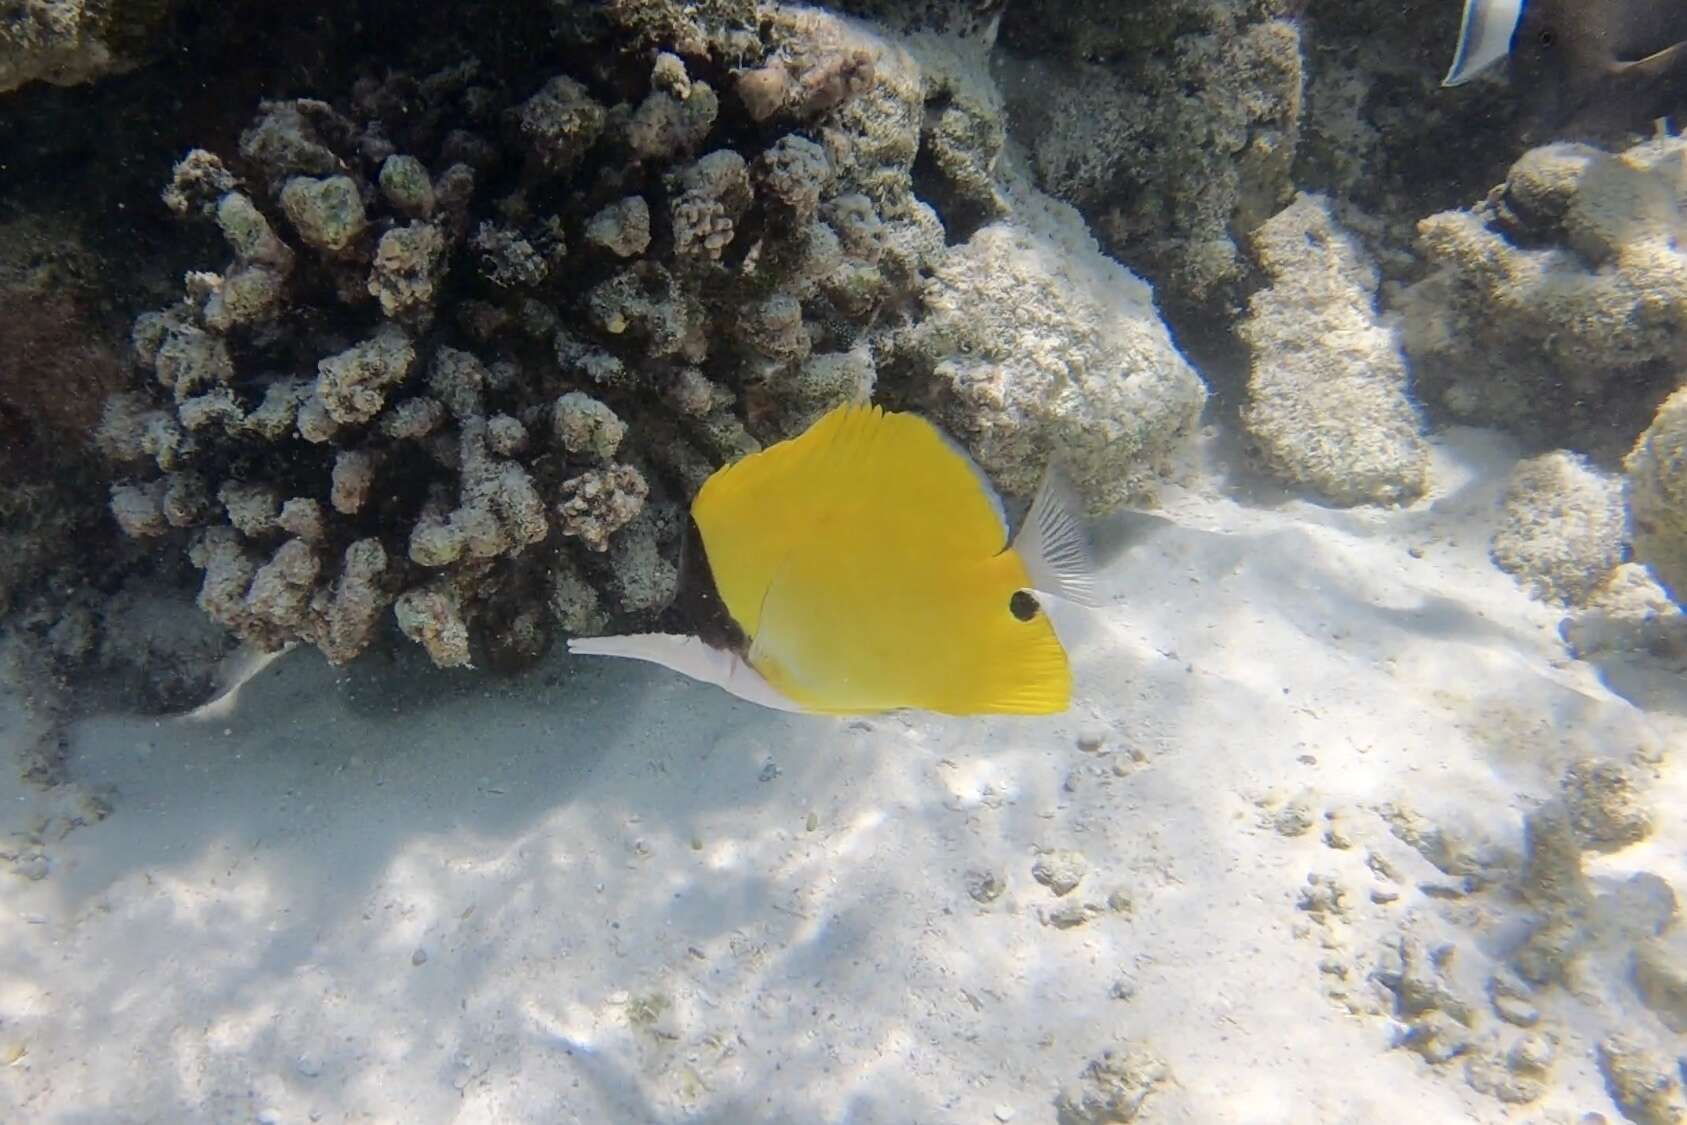 Image of Longnose butterflyfishes